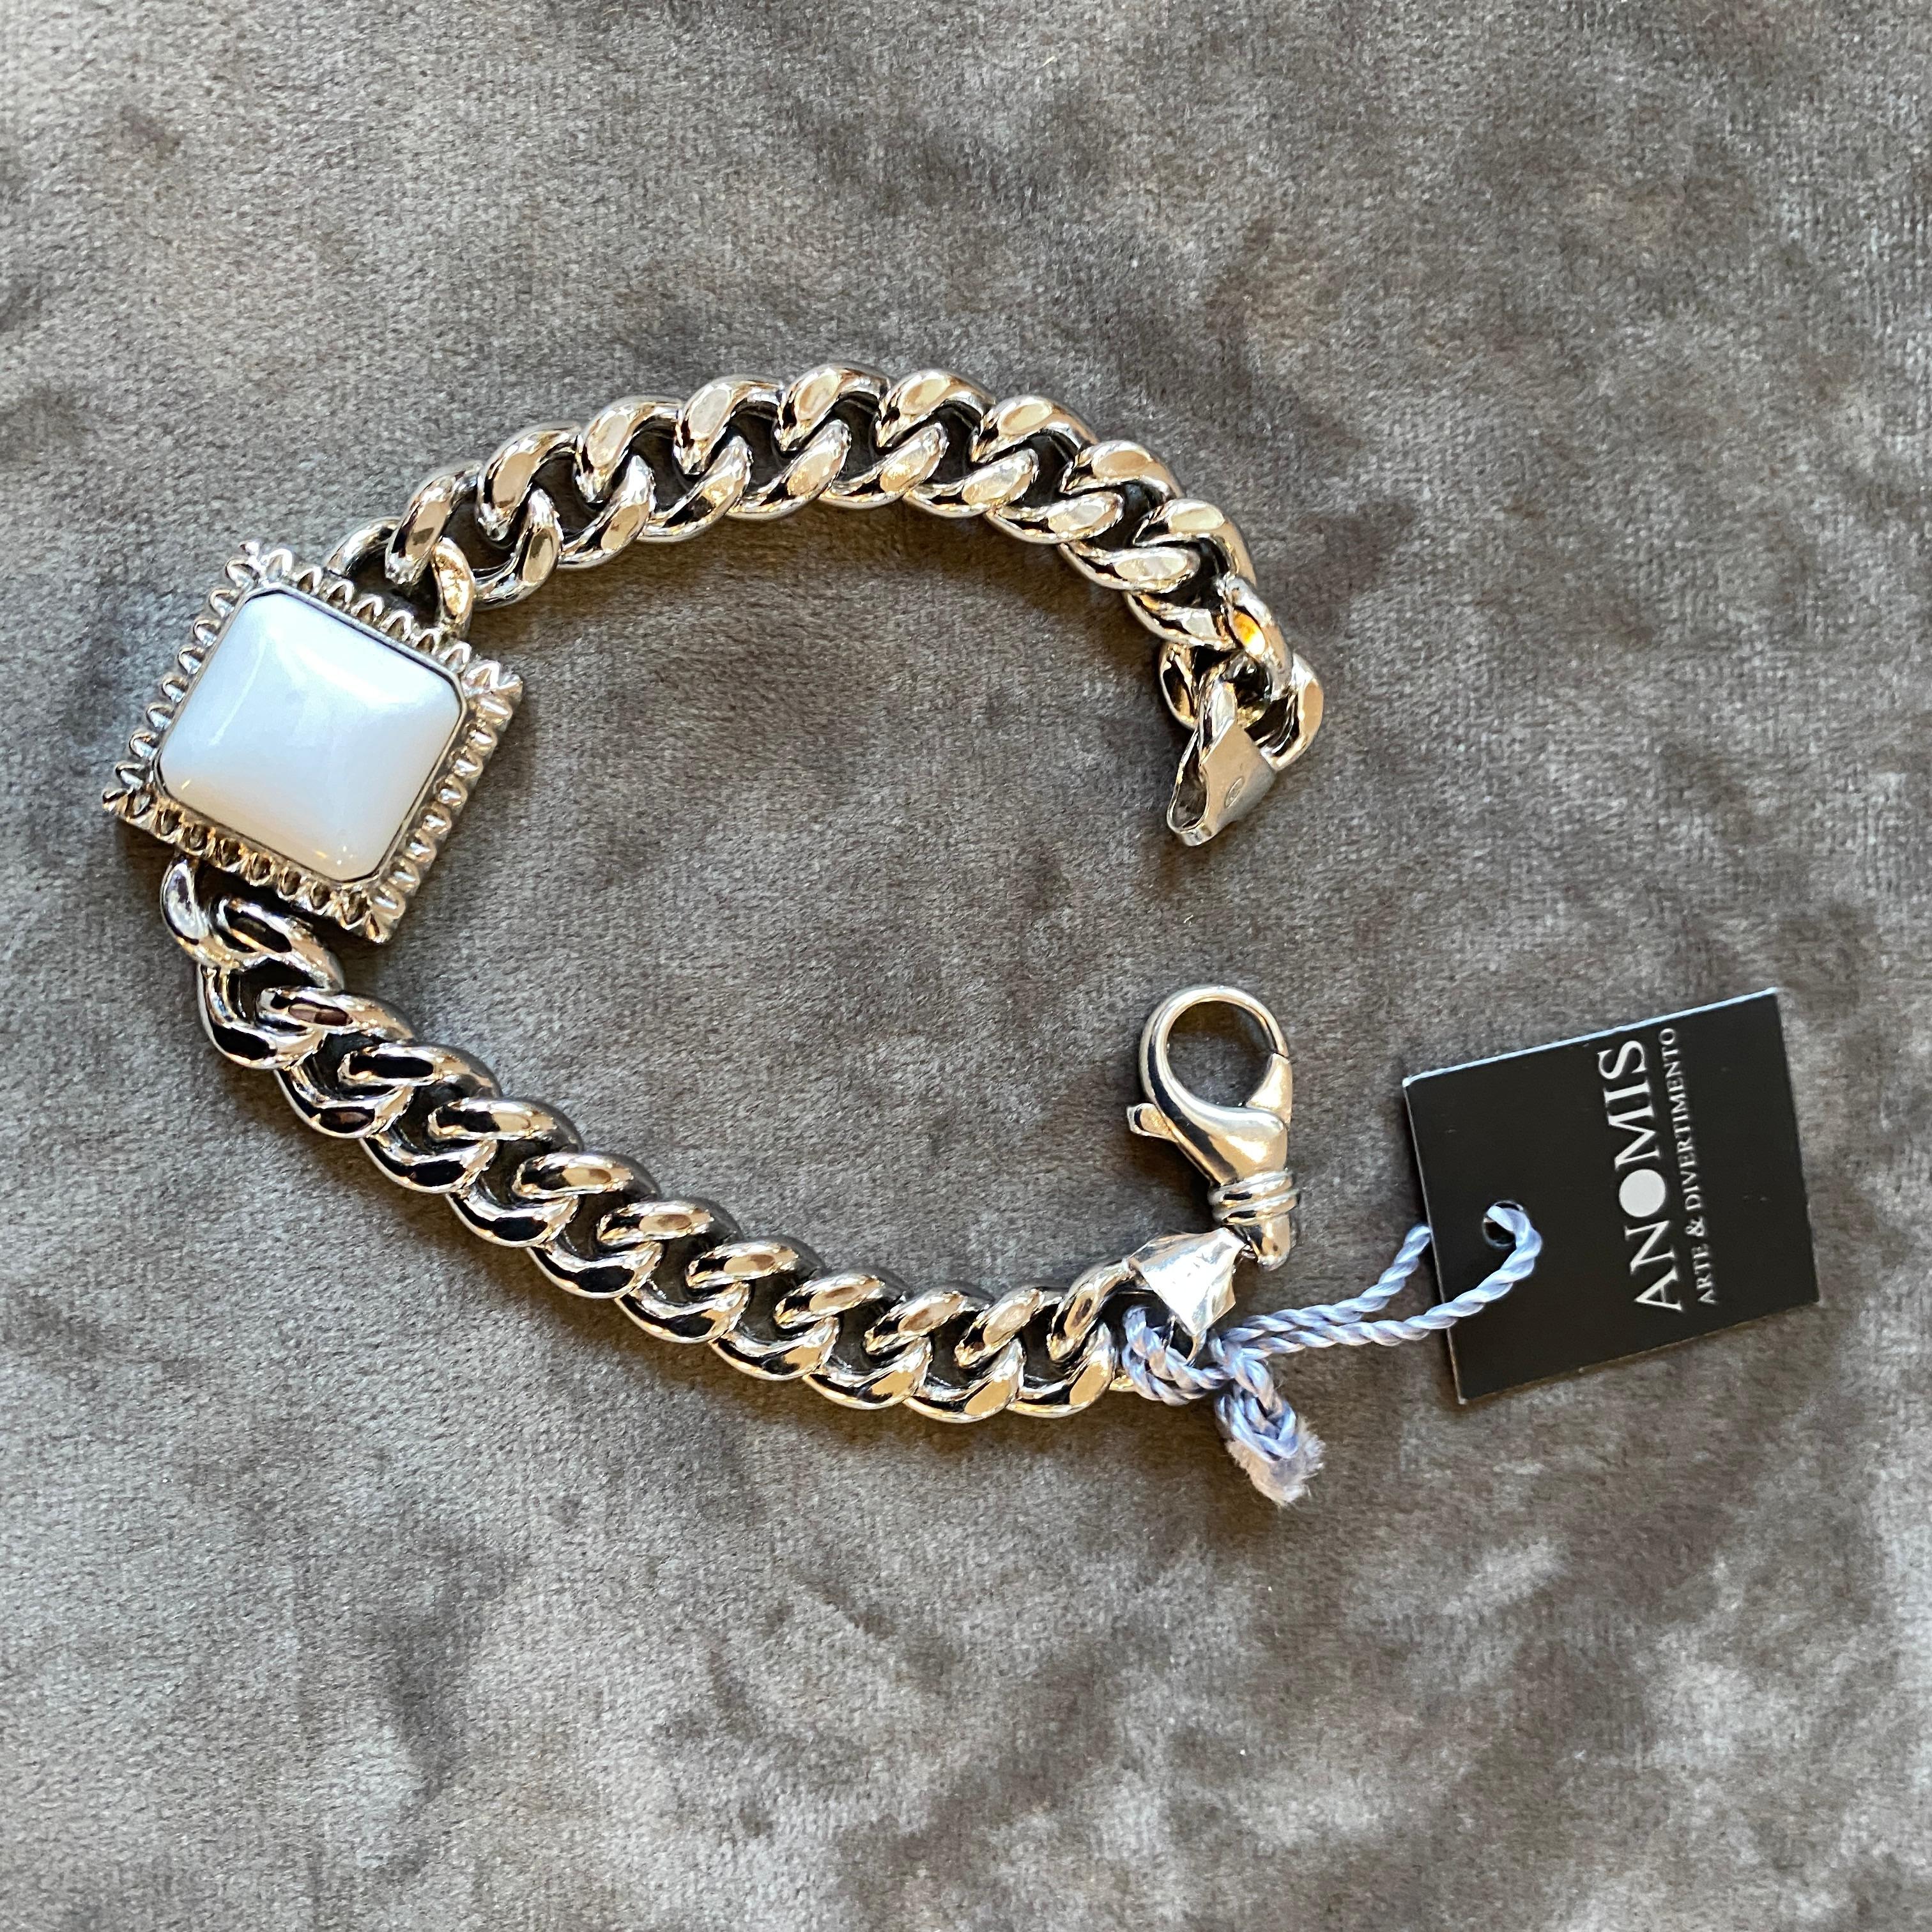 A 1990s Vintage Sterling Silver and White Agate Cabochon Italian Chain Bracelet In Excellent Condition For Sale In Aci Castello, IT